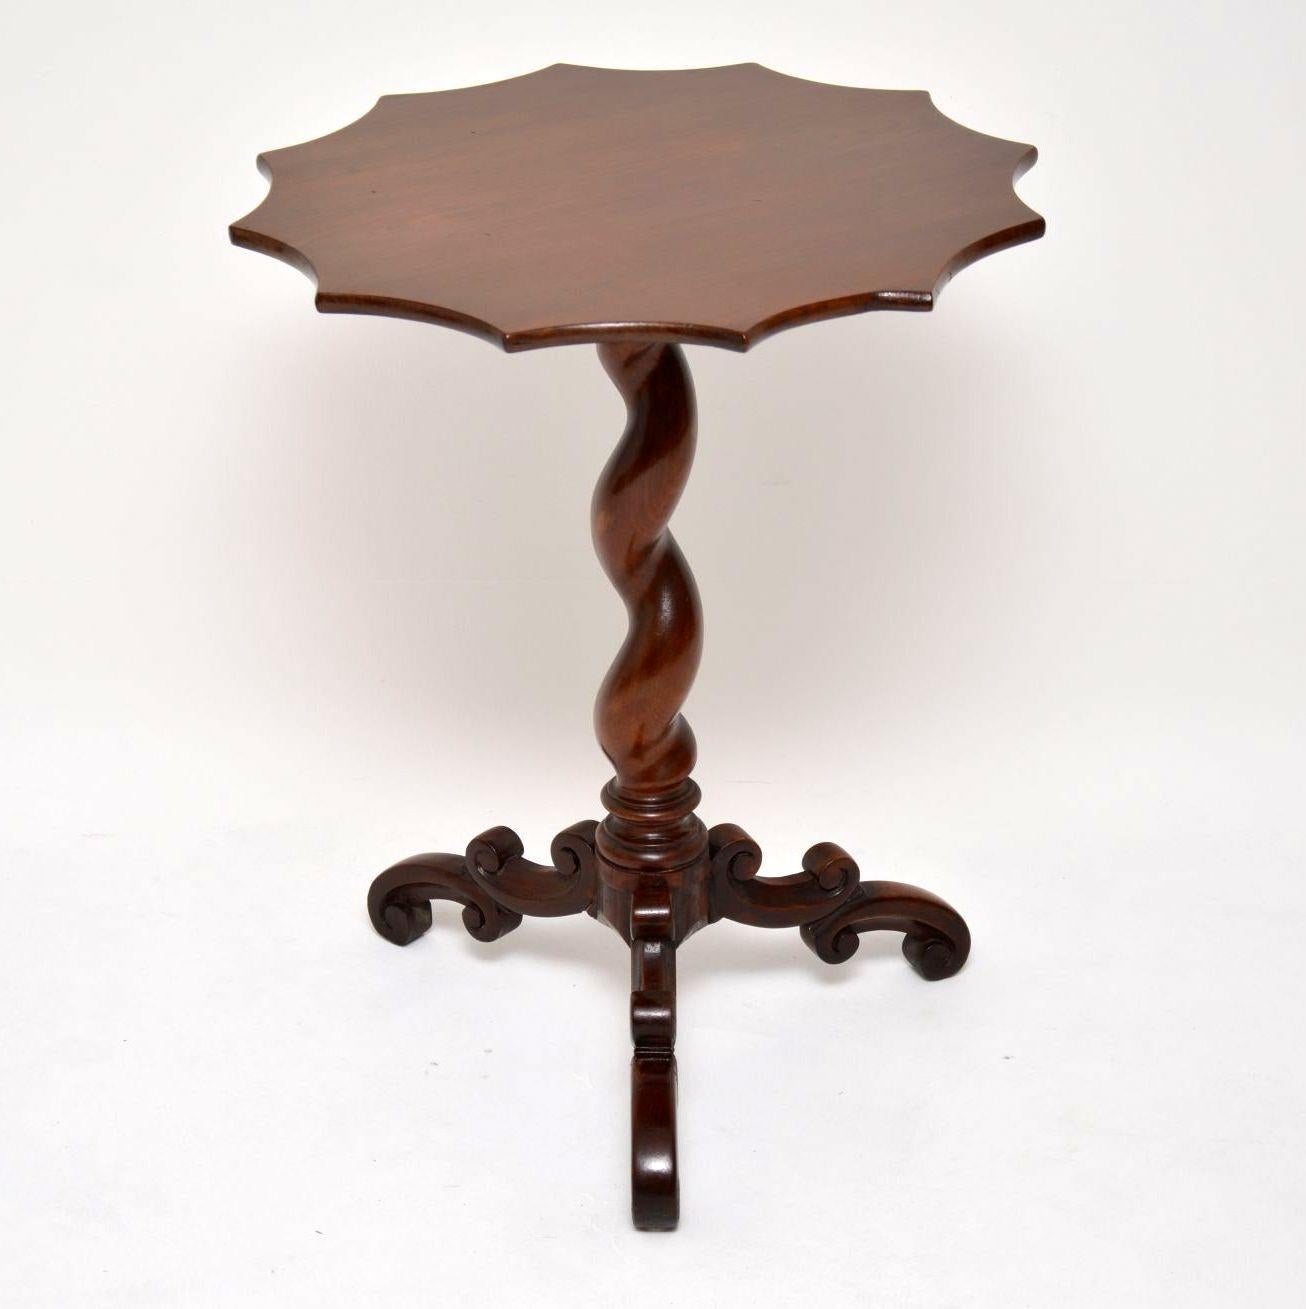 This solid mahogany occasional table is from the William IV – 1830-1840 period and is in excellent original condition. It also has some lovely features, like the twelve cut out sides on the top, the think barley twist pedestal and the shaped out